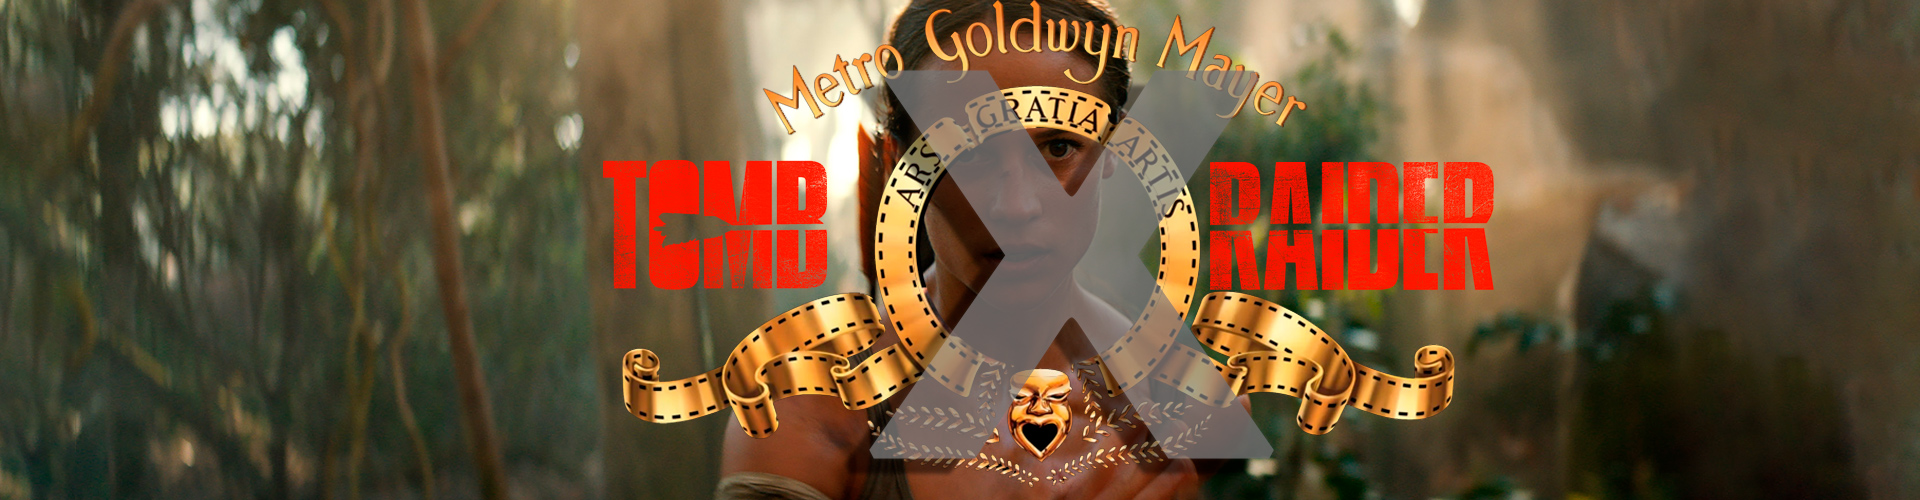 Metro Golden Mayer loses the Tomb Raider movie rights